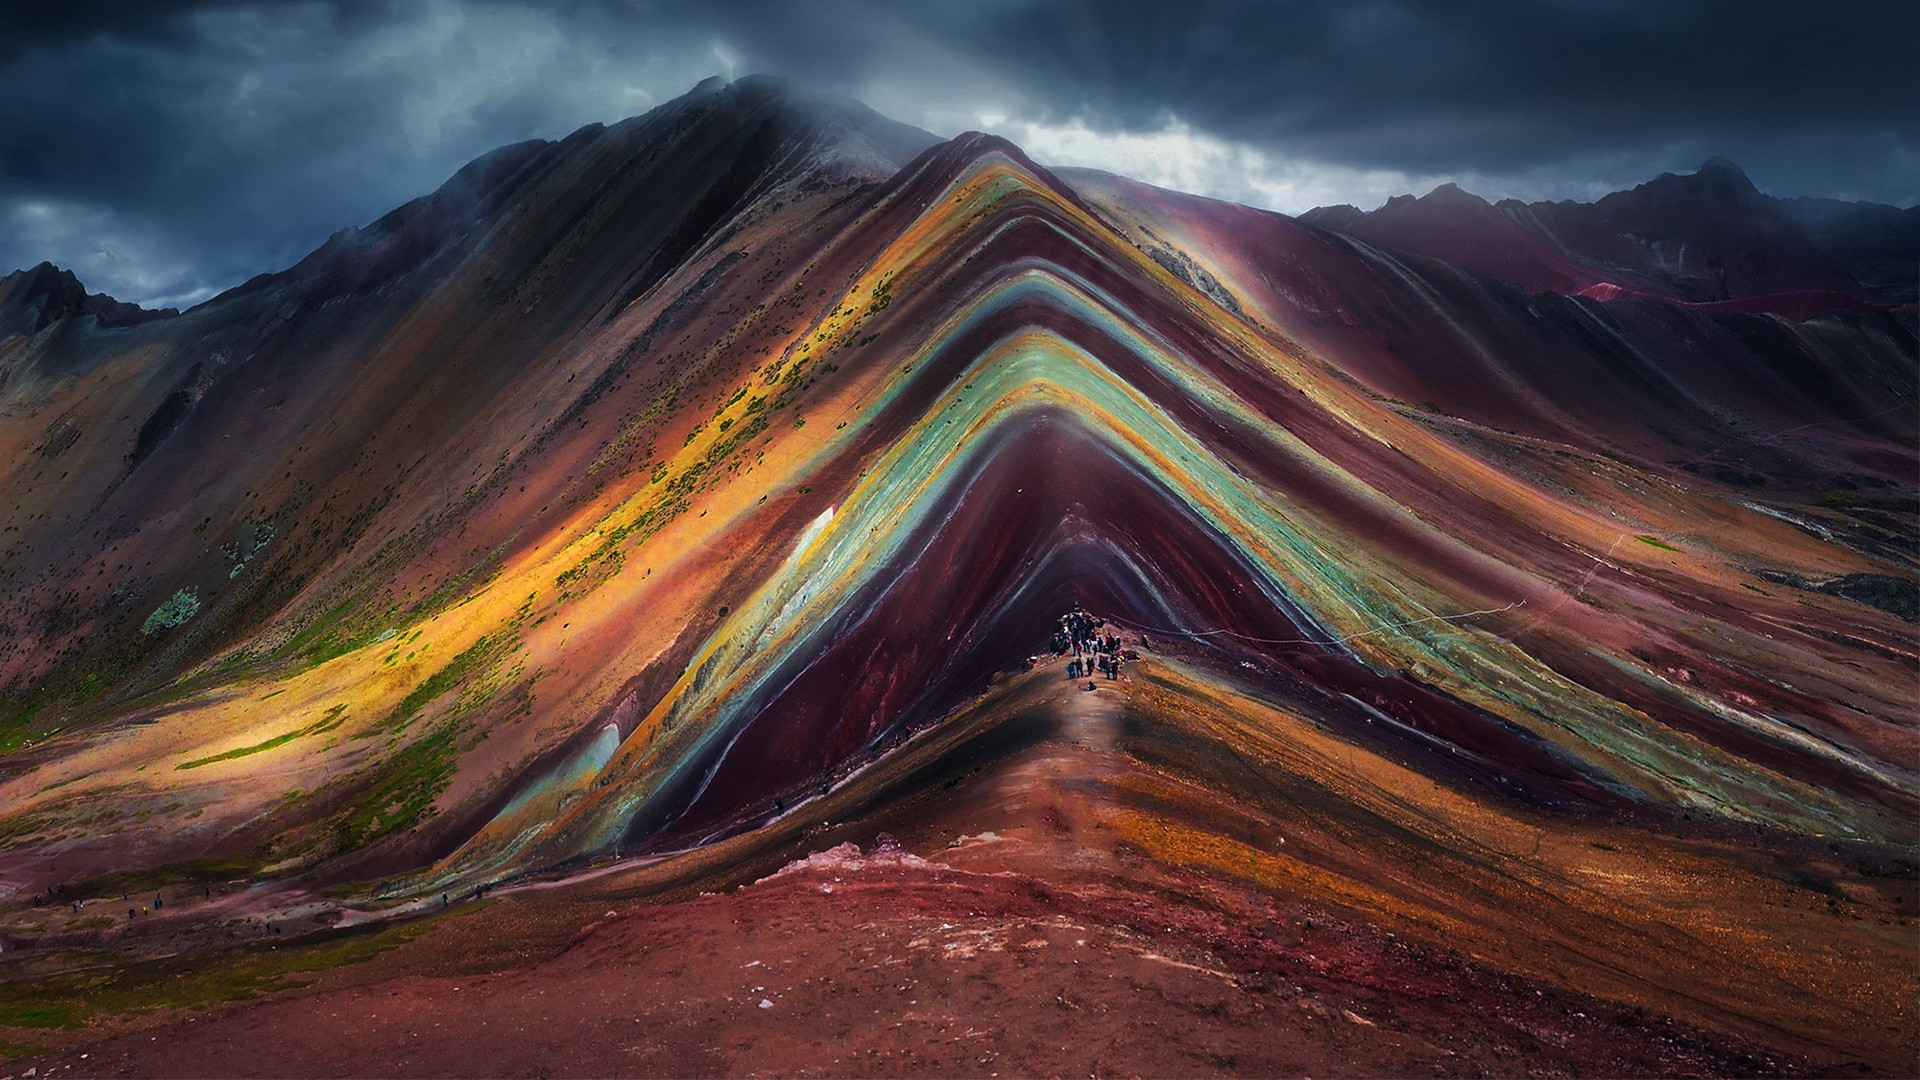 A mountain with colorful stripes on it - Mountain